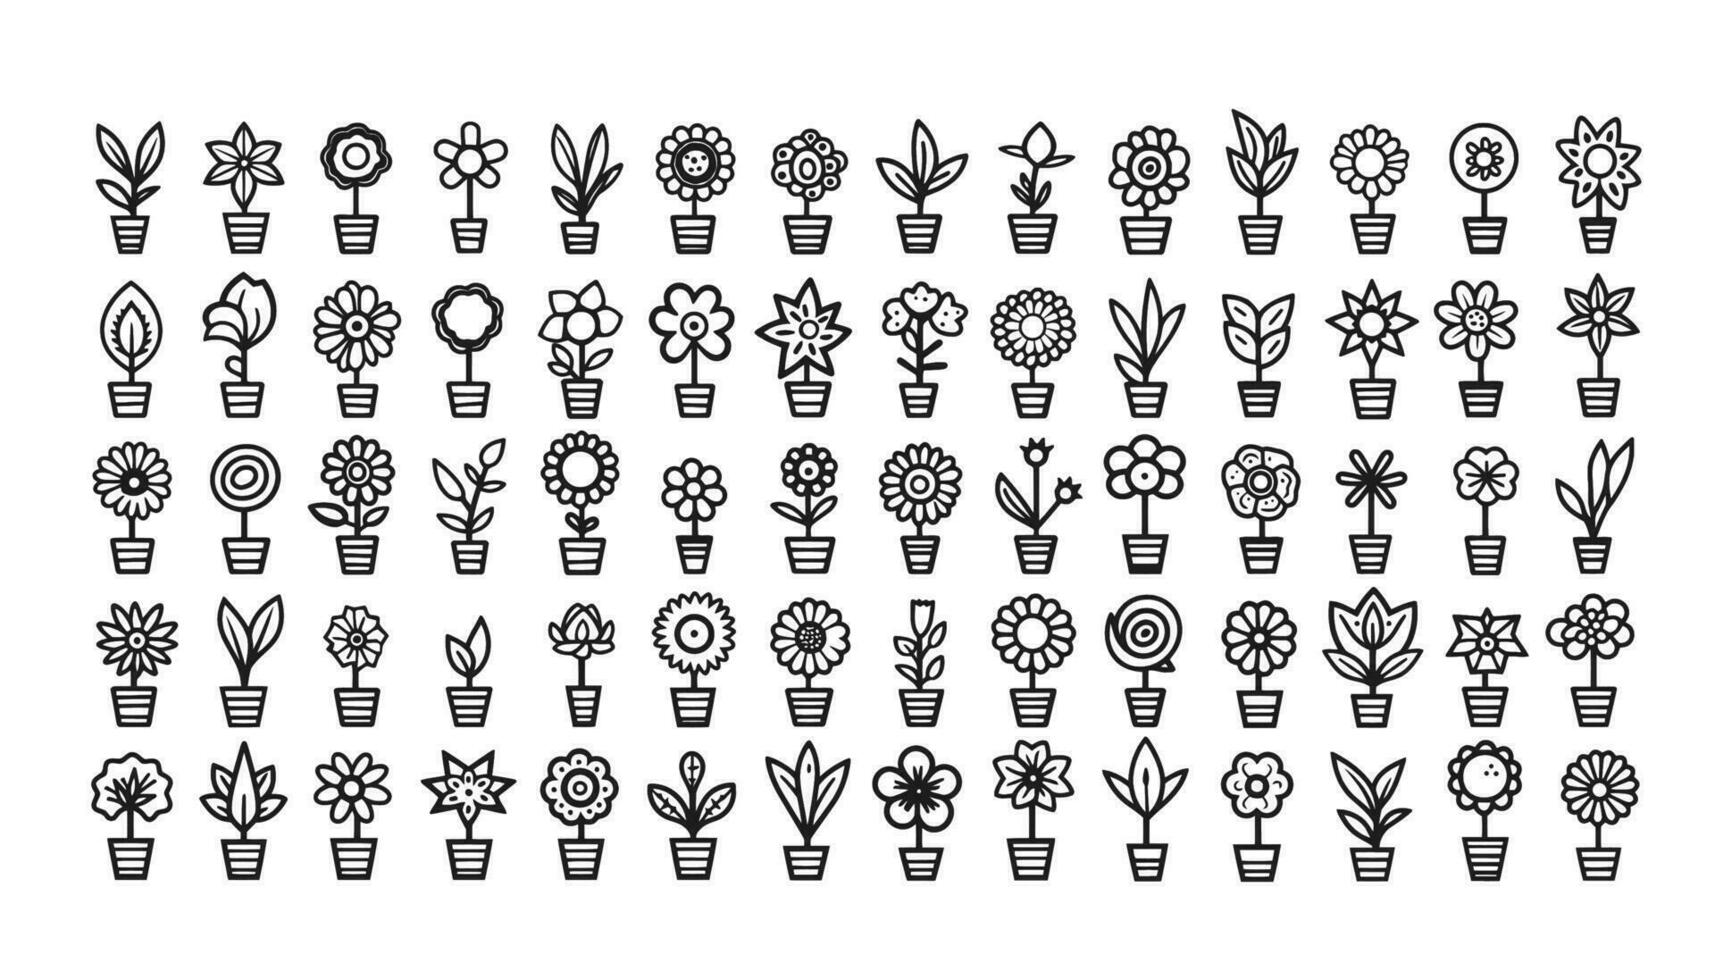 Flower in the pot clipart set. Collection of 70 sleek black and white plants illustrations. Minimalist elegance for your design project. vector